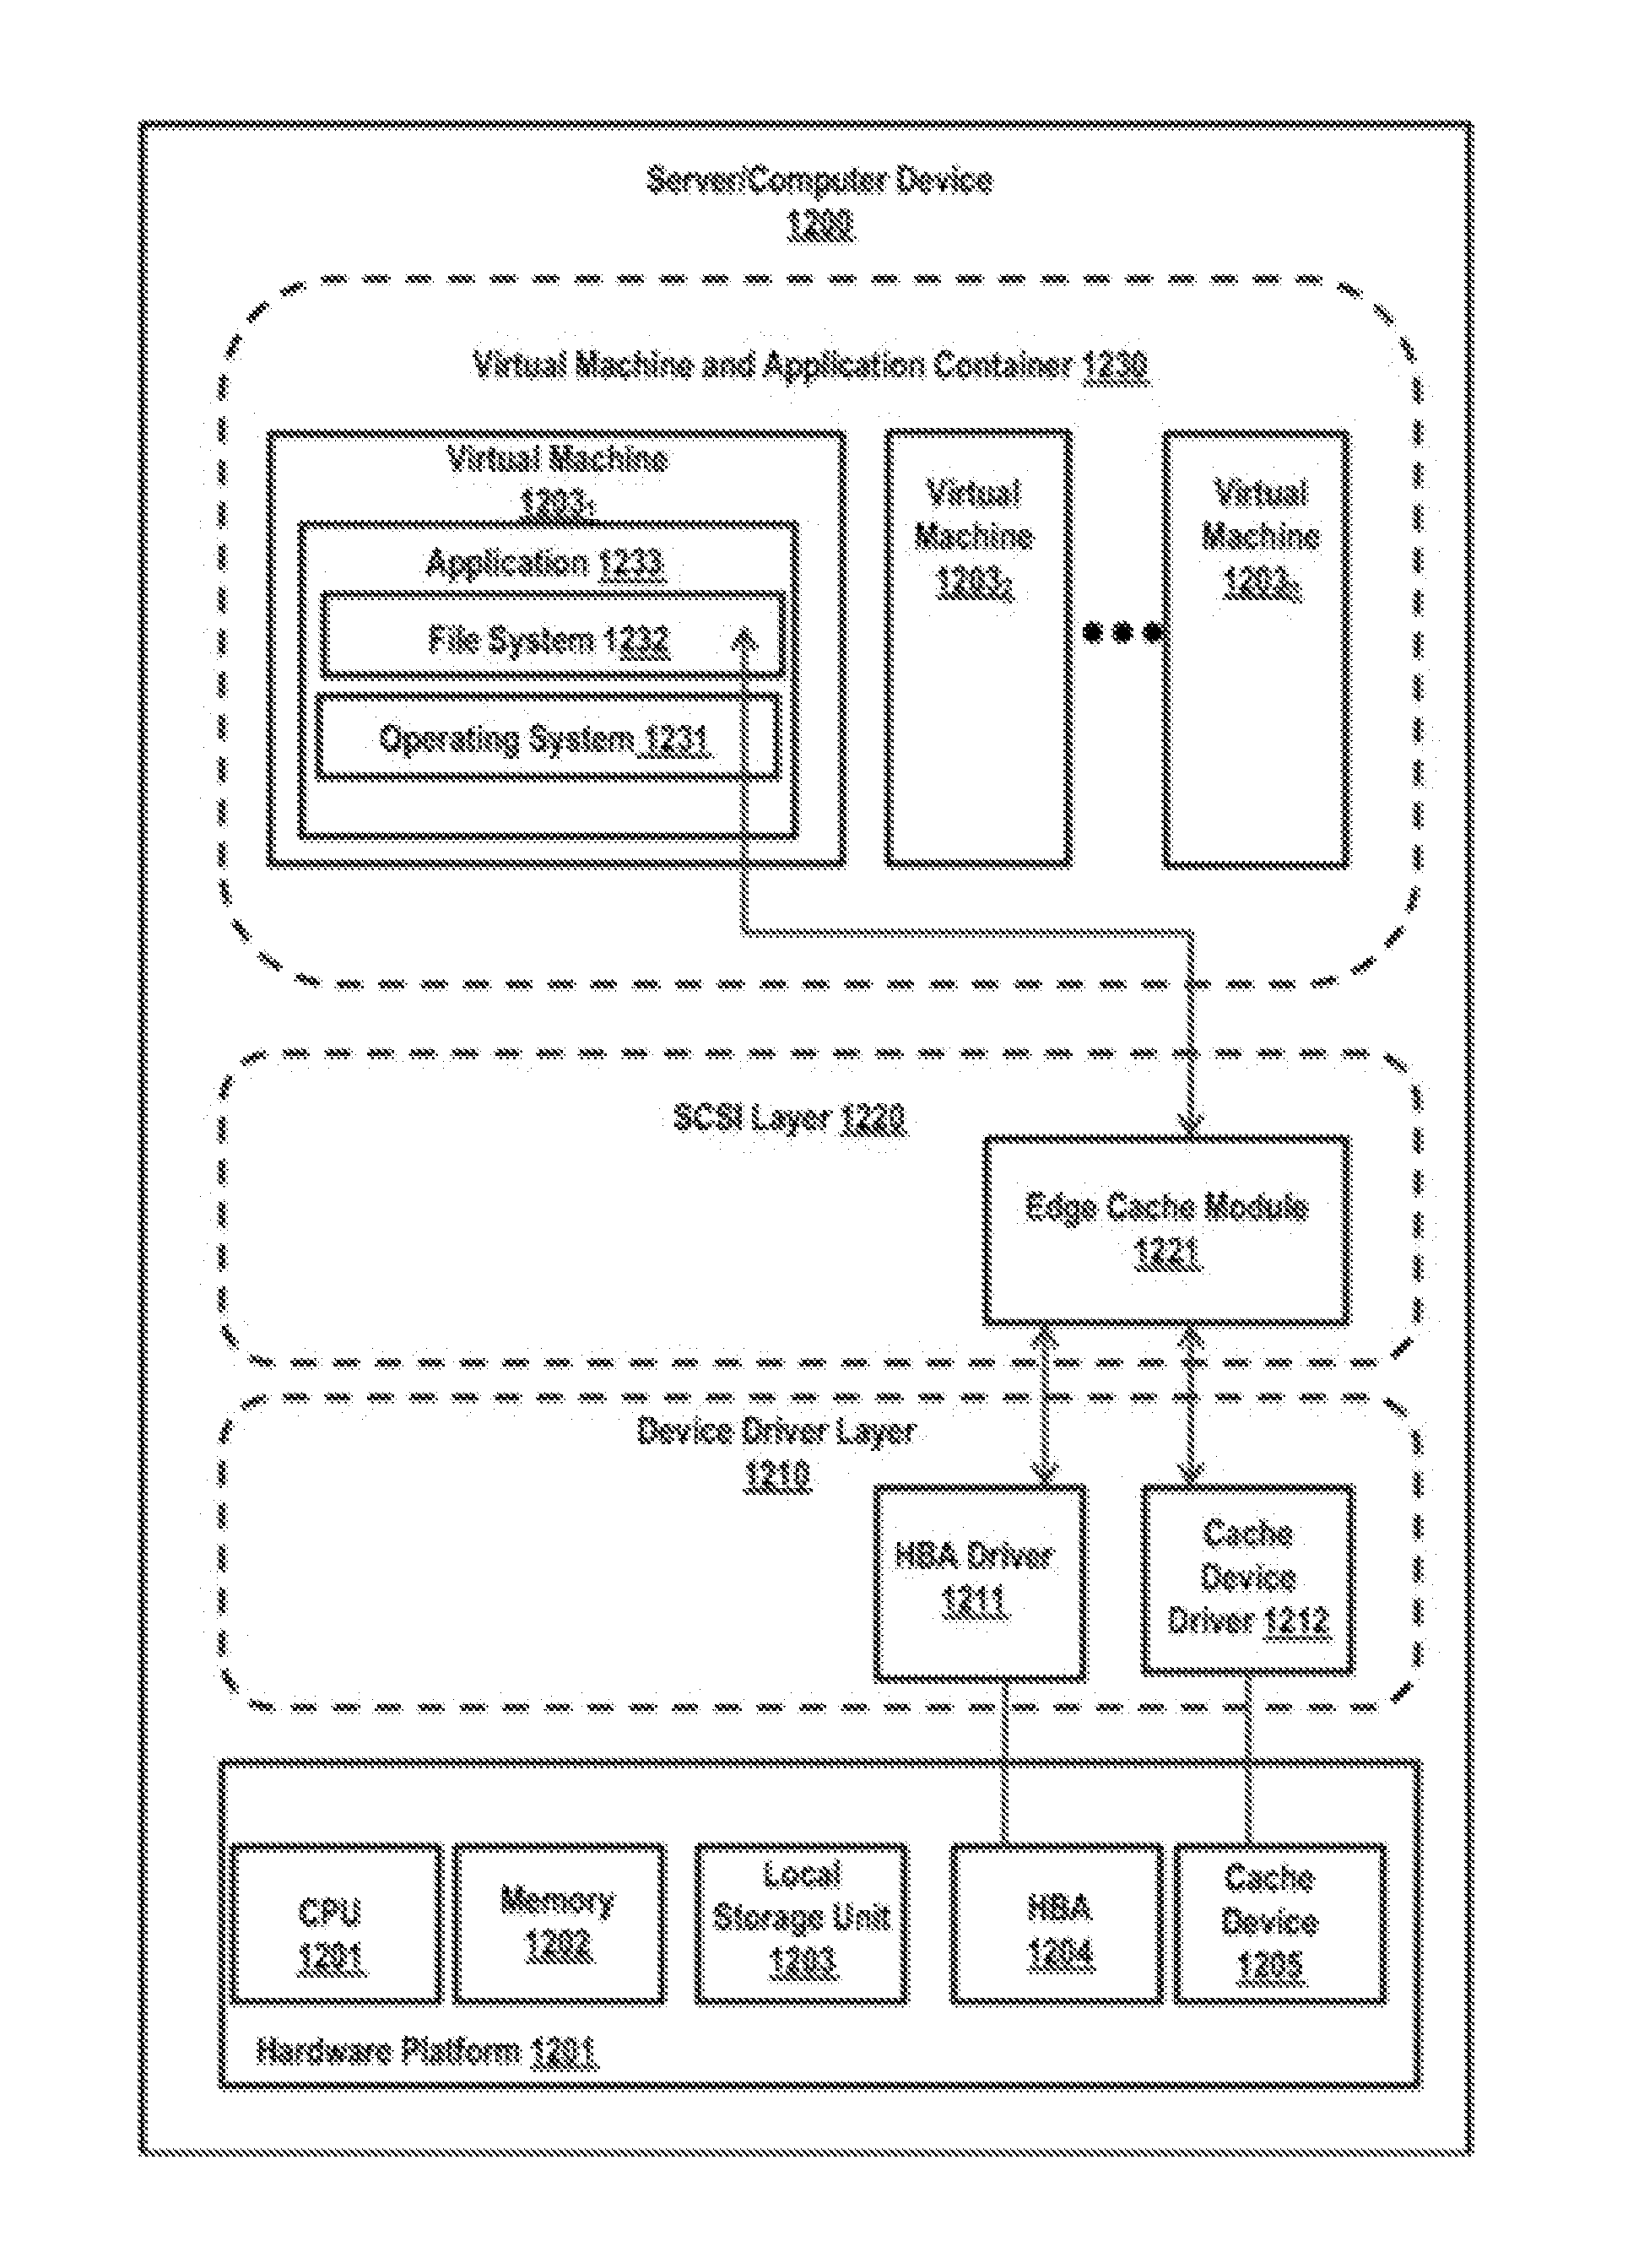 Extending a cache of a storage system